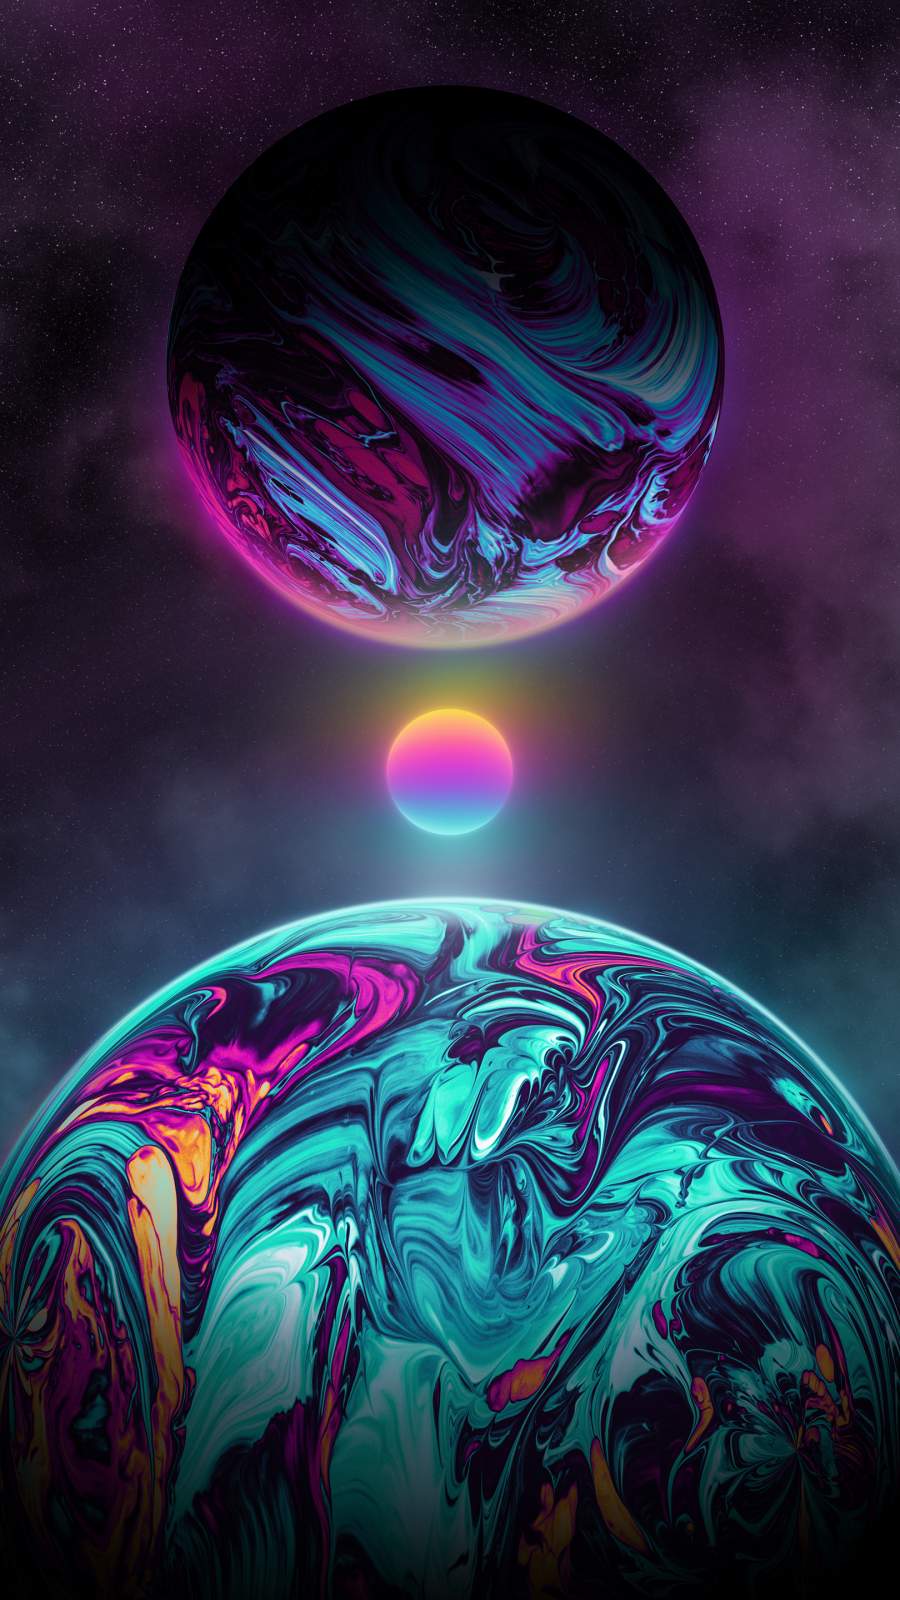 Art Of Space IPhone Wallpaper - IPhone Wallpapers : iPhone Wallpapers